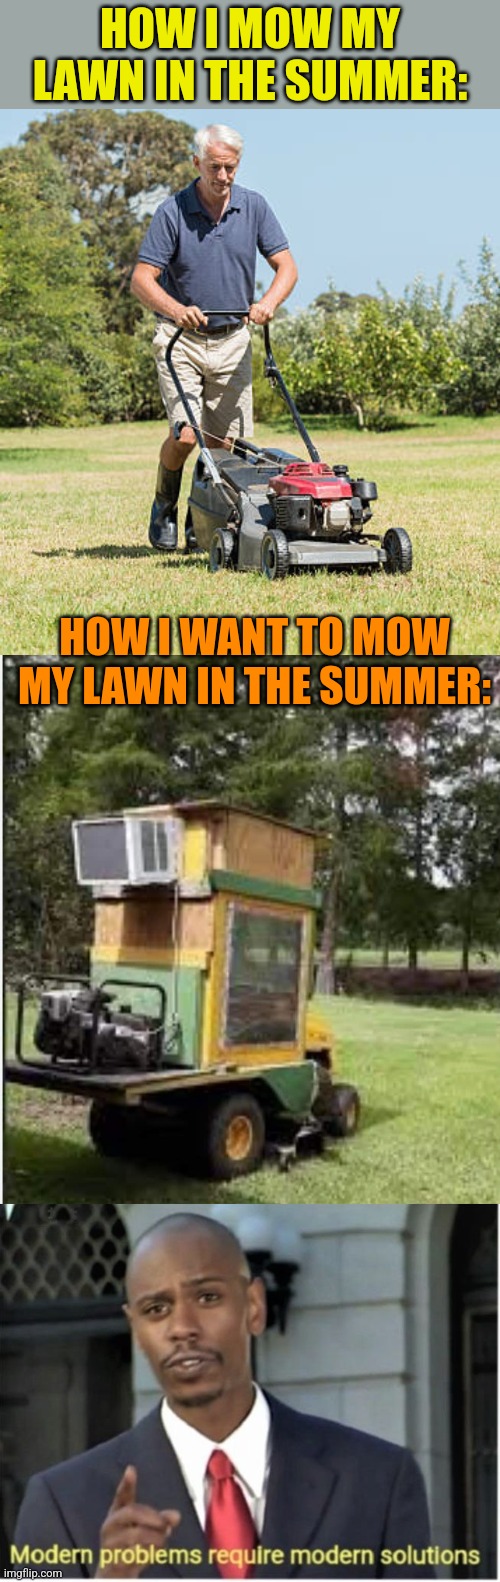 Cool Ride | HOW I MOW MY LAWN IN THE SUMMER:; HOW I WANT TO MOW MY LAWN IN THE SUMMER: | image tagged in modern problems require modern solutions,air conditioner,lawnmower,mowing,grass | made w/ Imgflip meme maker